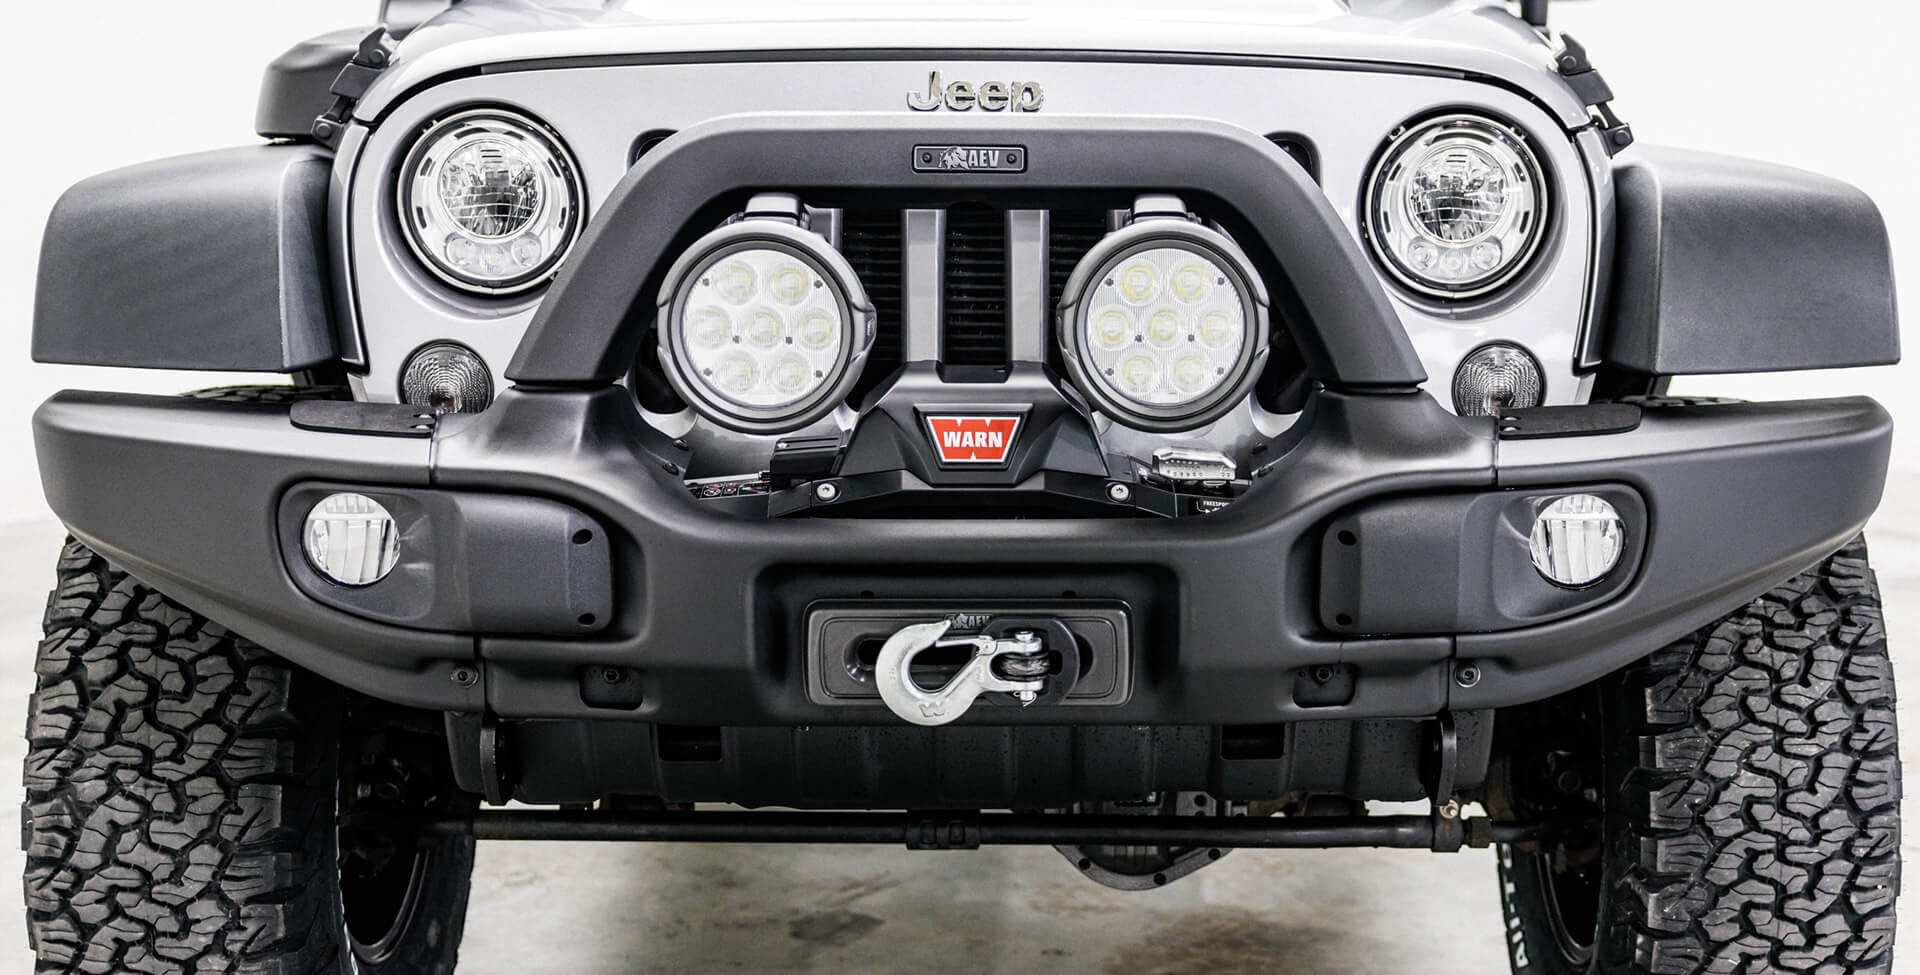 EX/RX Front Bumper for JK Wrangler - American Expedition Vehicles